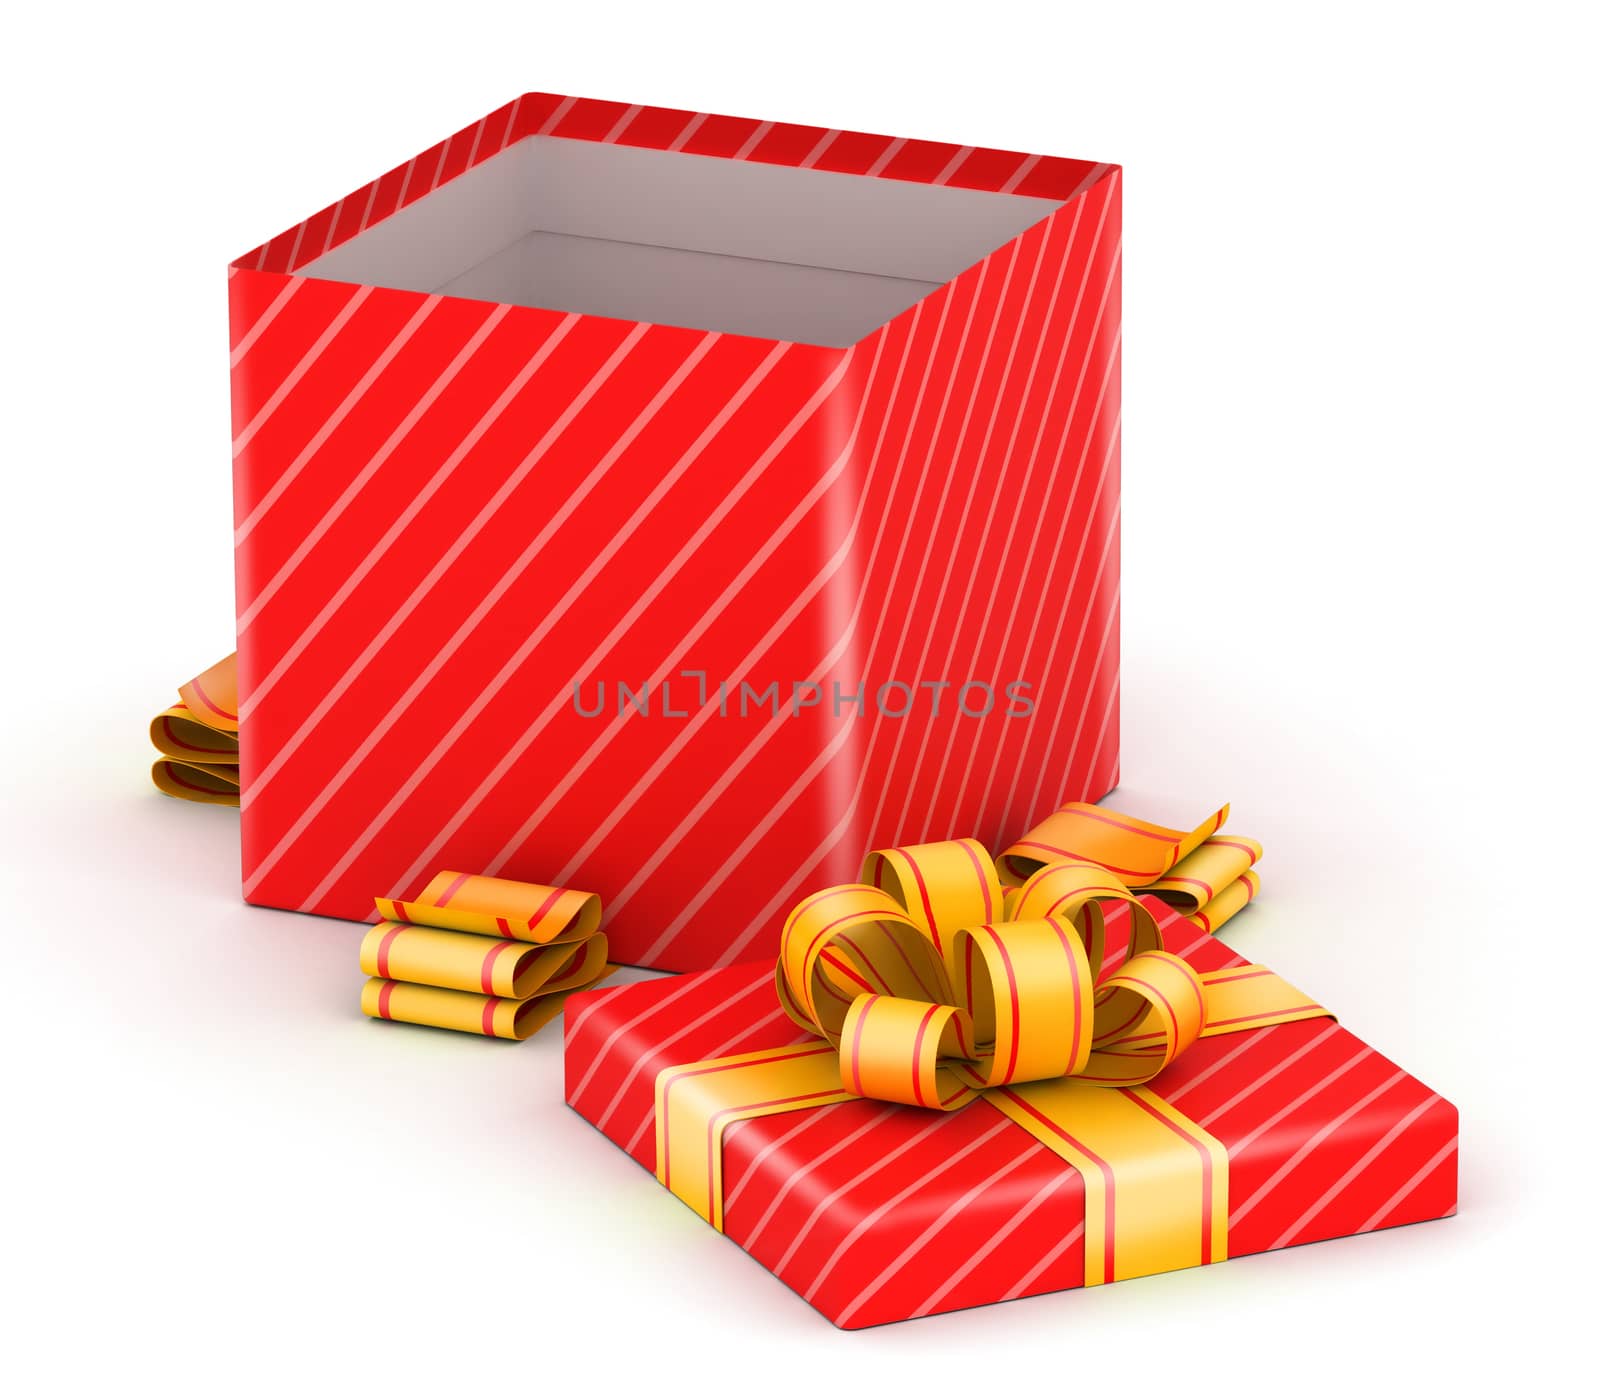 Opened red gift box by iunewind